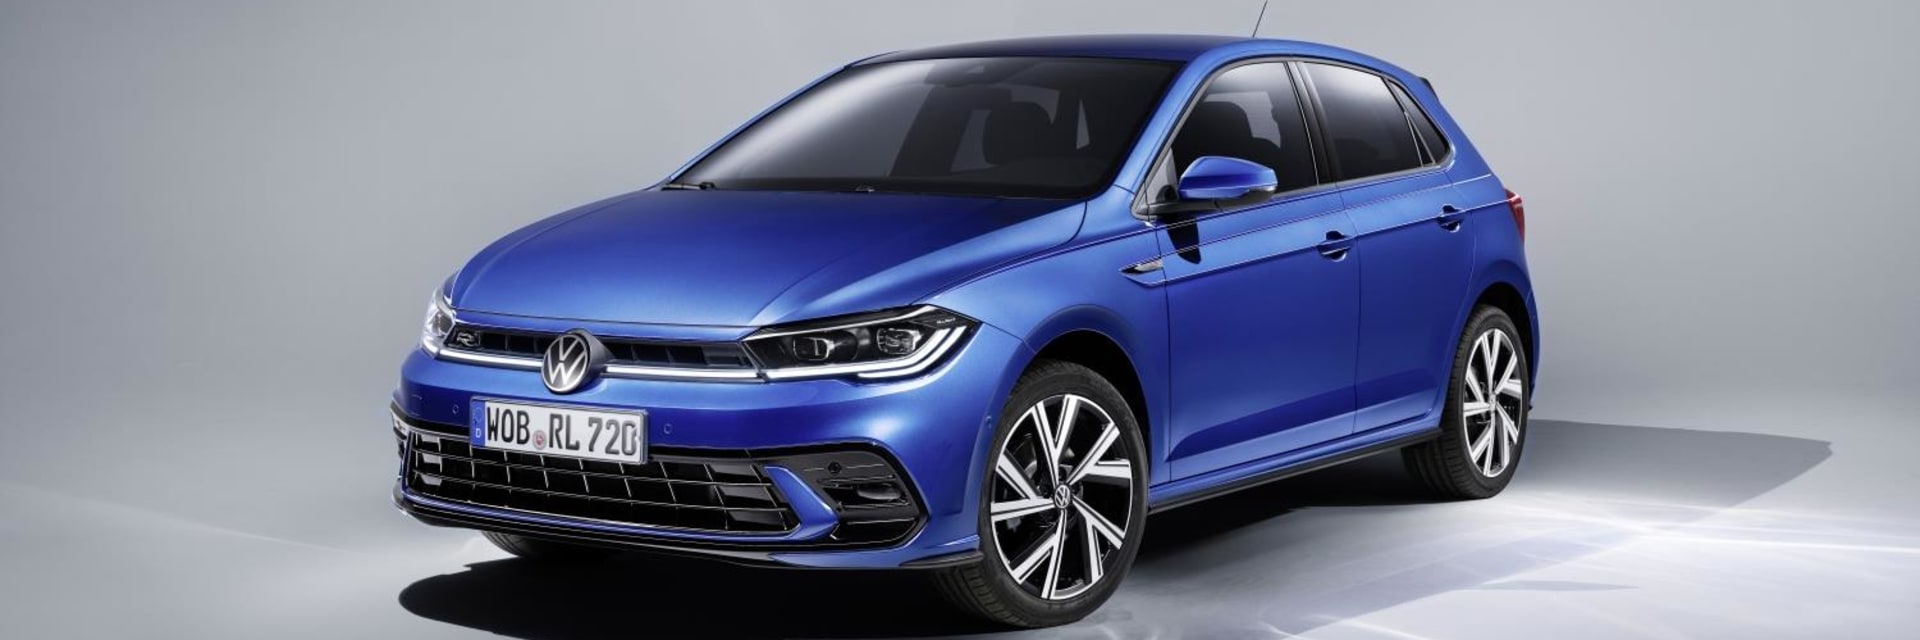 NEW VOLKSWAGEN FACELIFT POLO AT DES WINKS